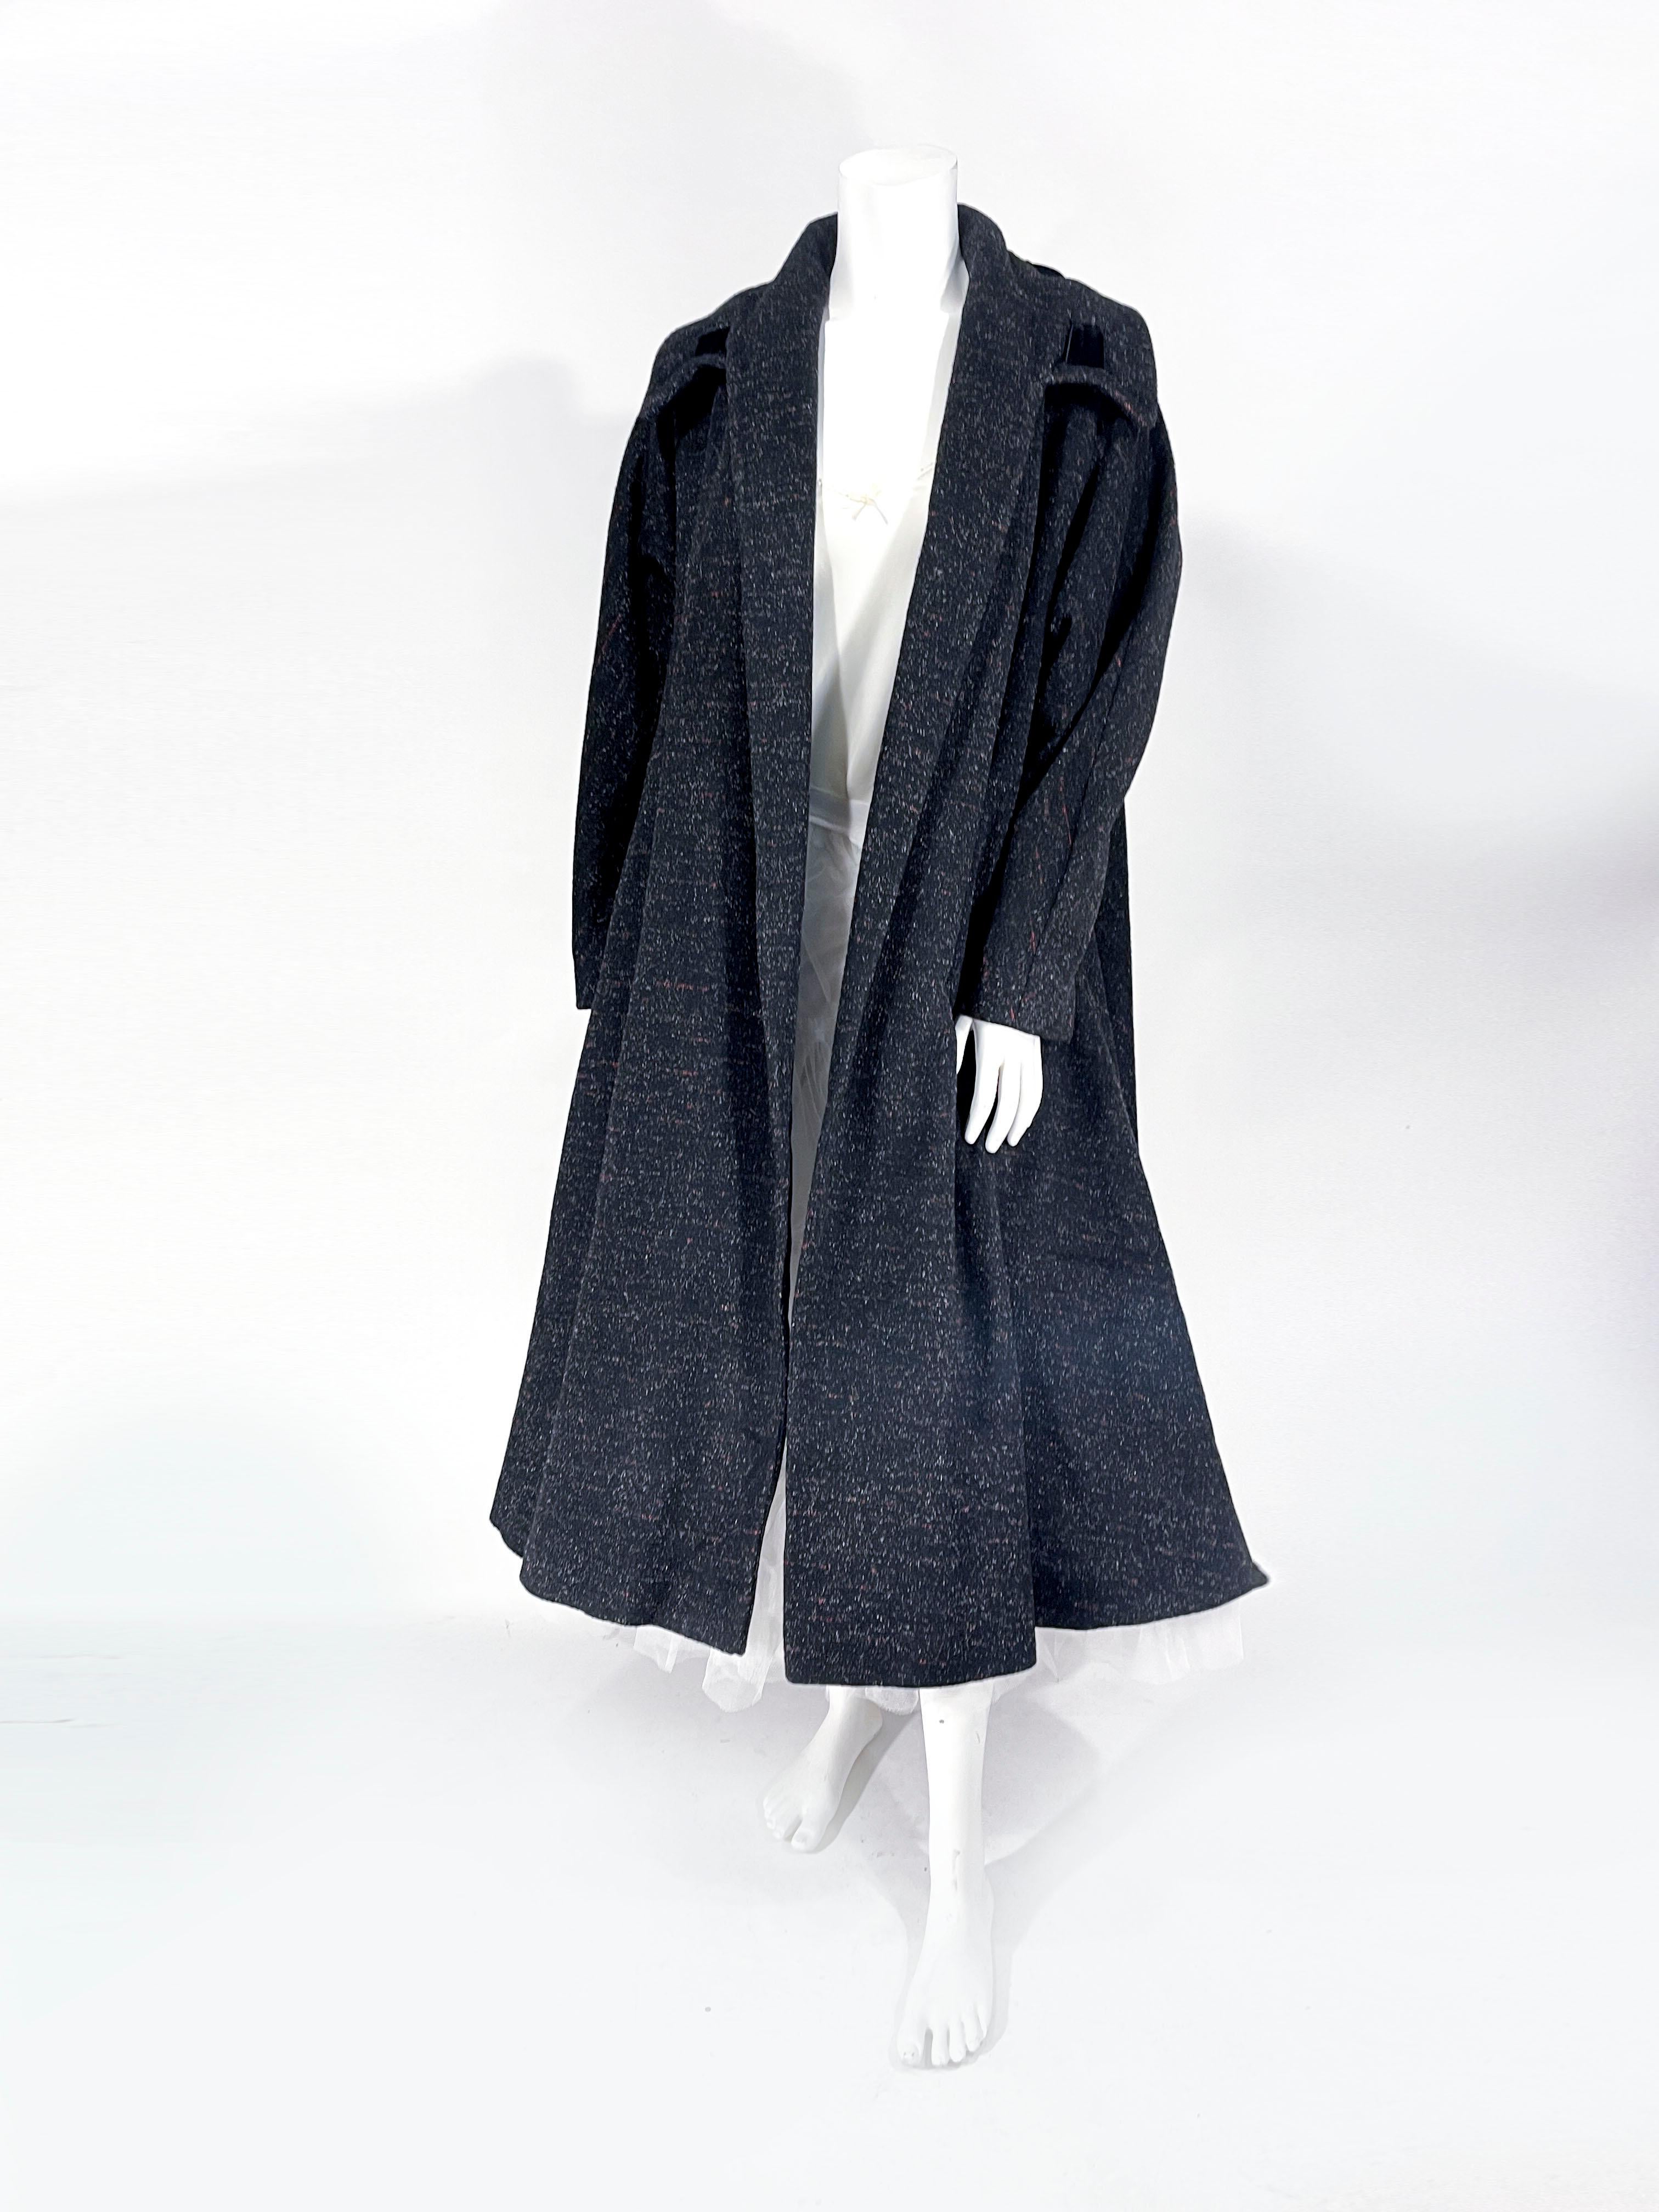 1950s Lilli Ann Swing coat featuring a woolen textile with fed horizontal flecked lines and white fleck throughout. The shawl collar warps around to a wide part of the collar decorated with a wide velvet band laced in and out of the edge. The wide